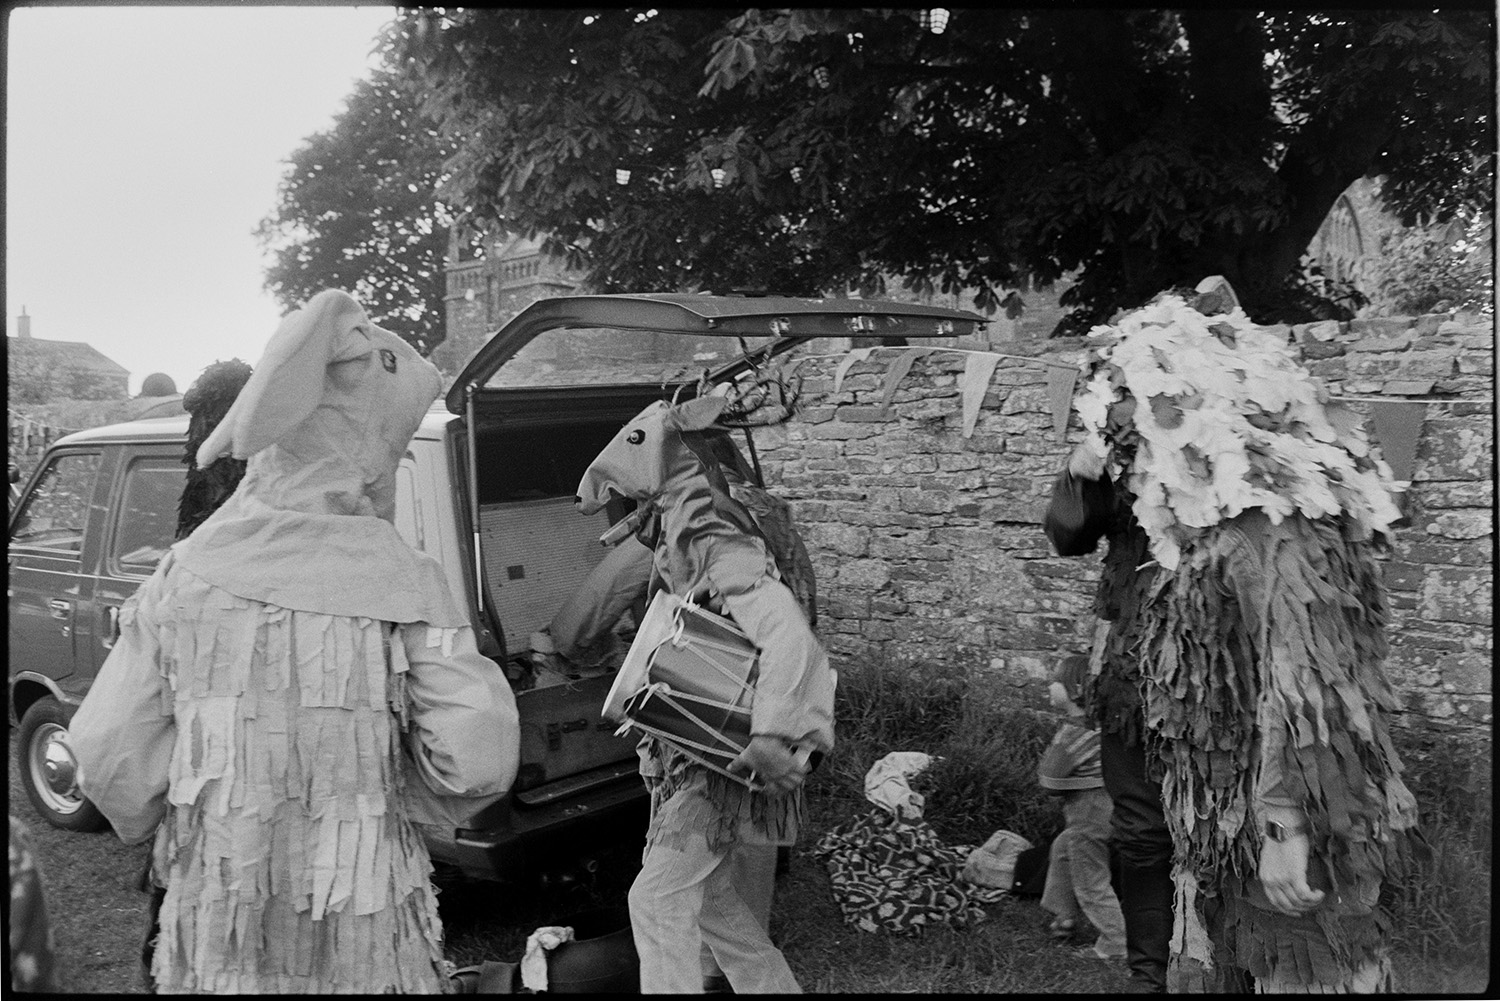 Morris men at revel.
[Three people dressed in costumes for a Mummers Play, one is holding a drum and unloading items from the back of a van parked next to the wall between the Church of St George and all Saints and Village Green in Beaford at the Beaford Revel.]